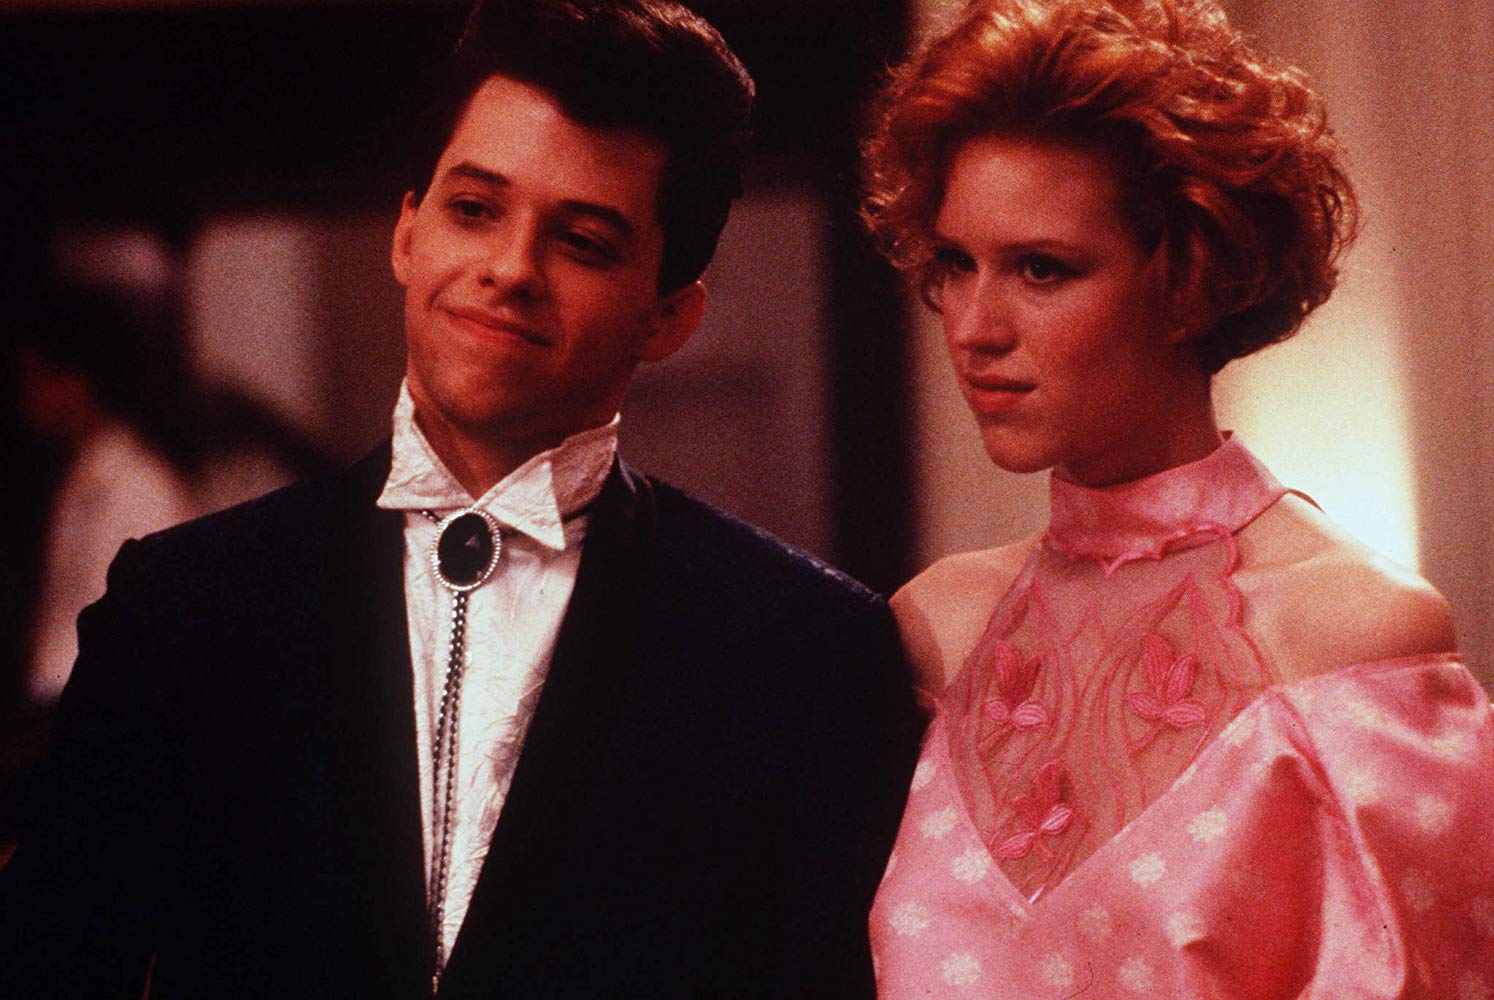 16. Pretty in Pink (1986)